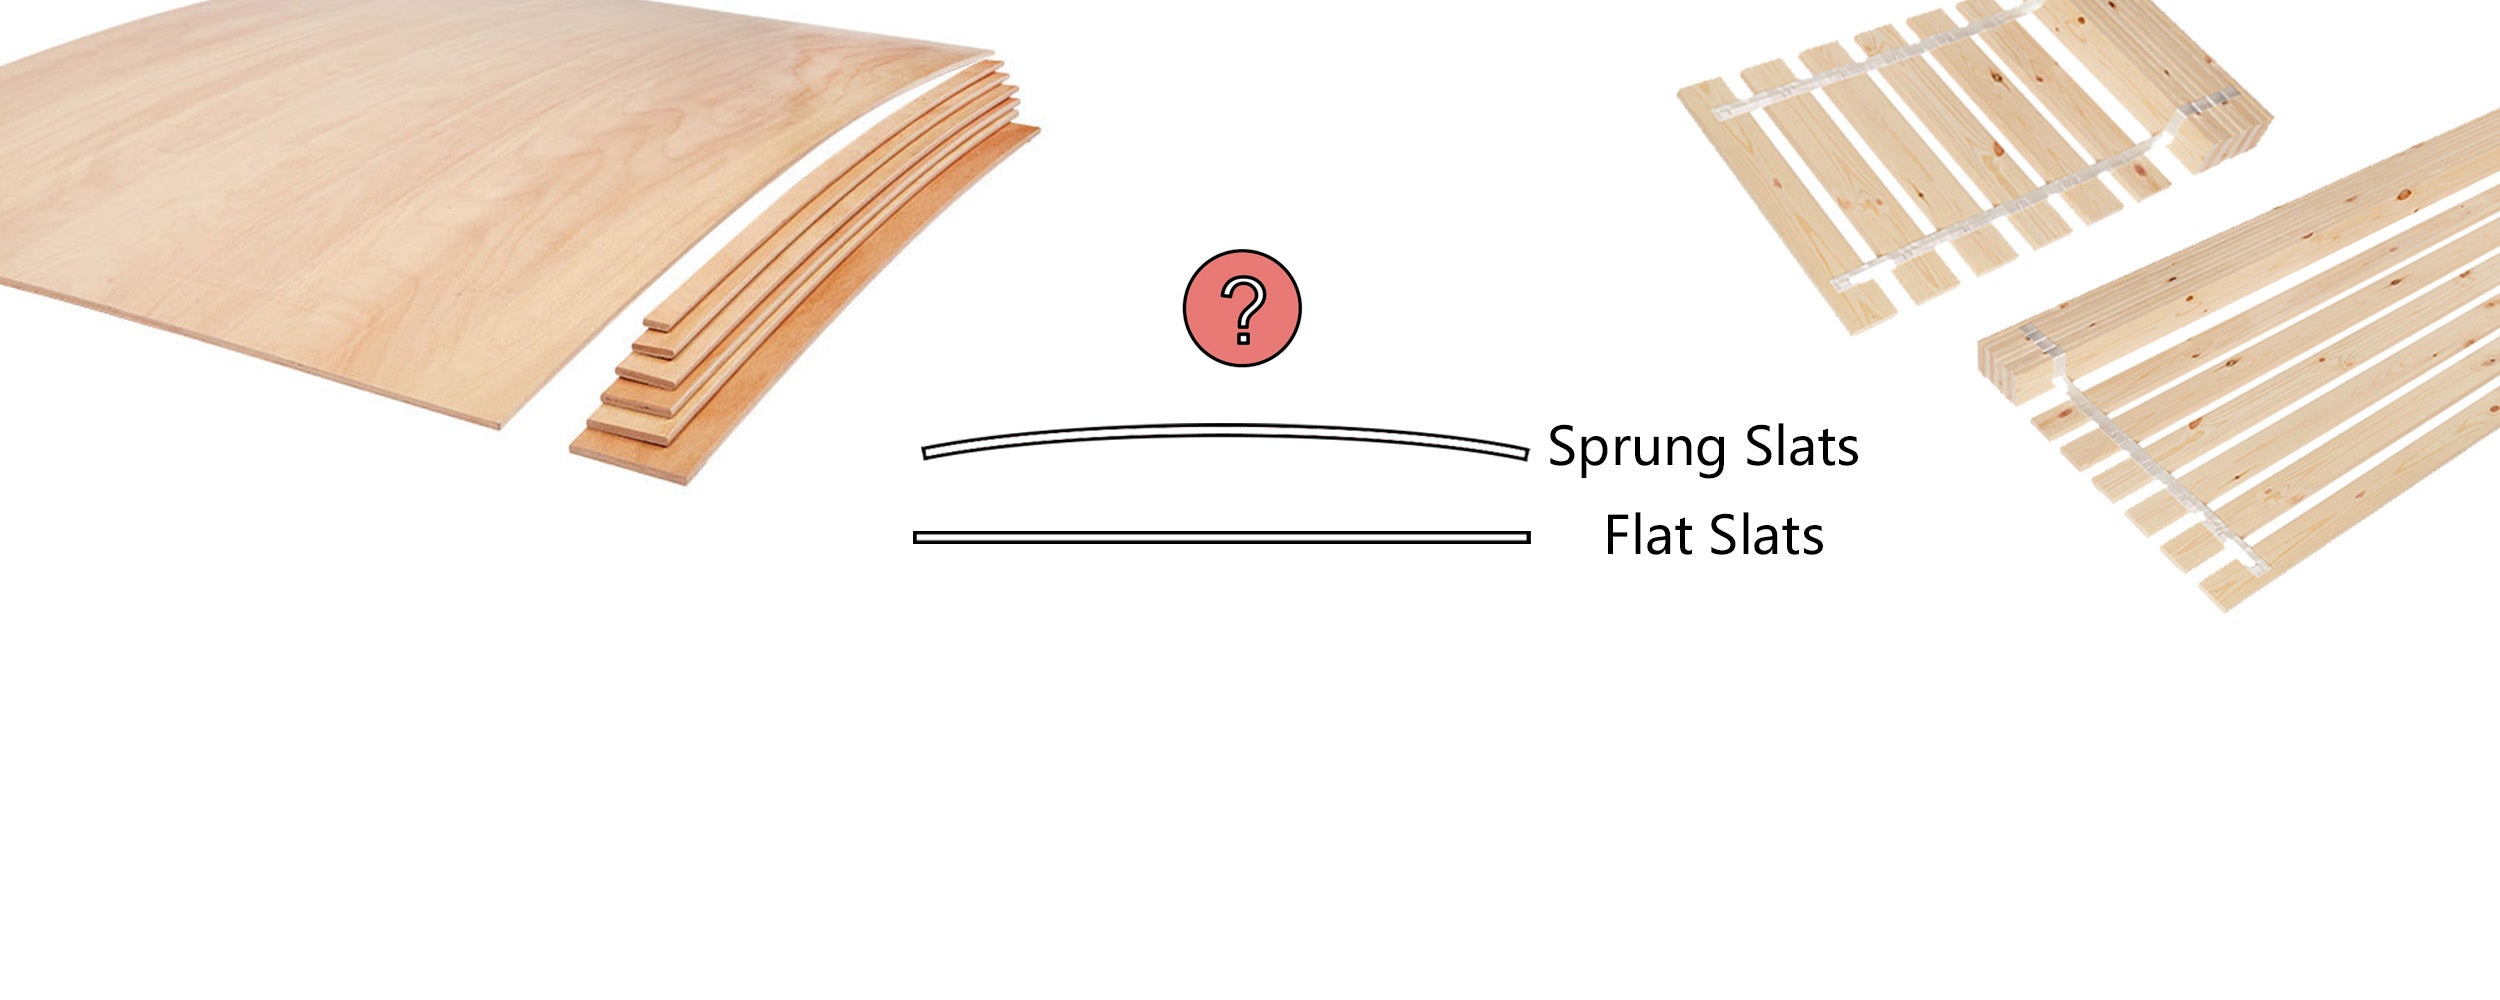 Distinguishing Between Sprung and Flat Bed Slats: A Guide to Identification